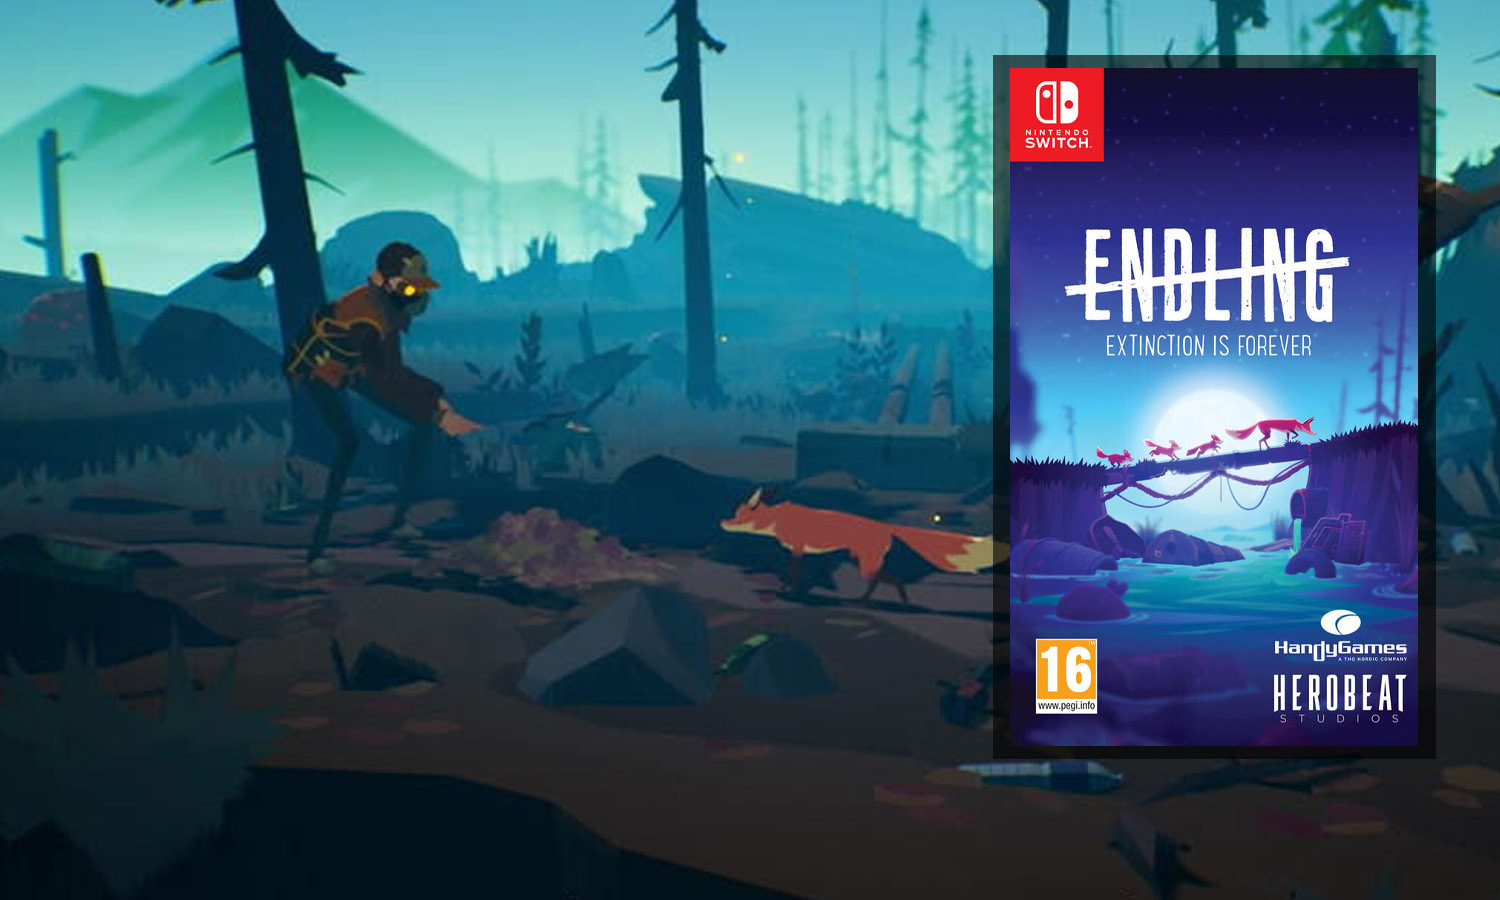 download free endling extinction is forever nintendo switch